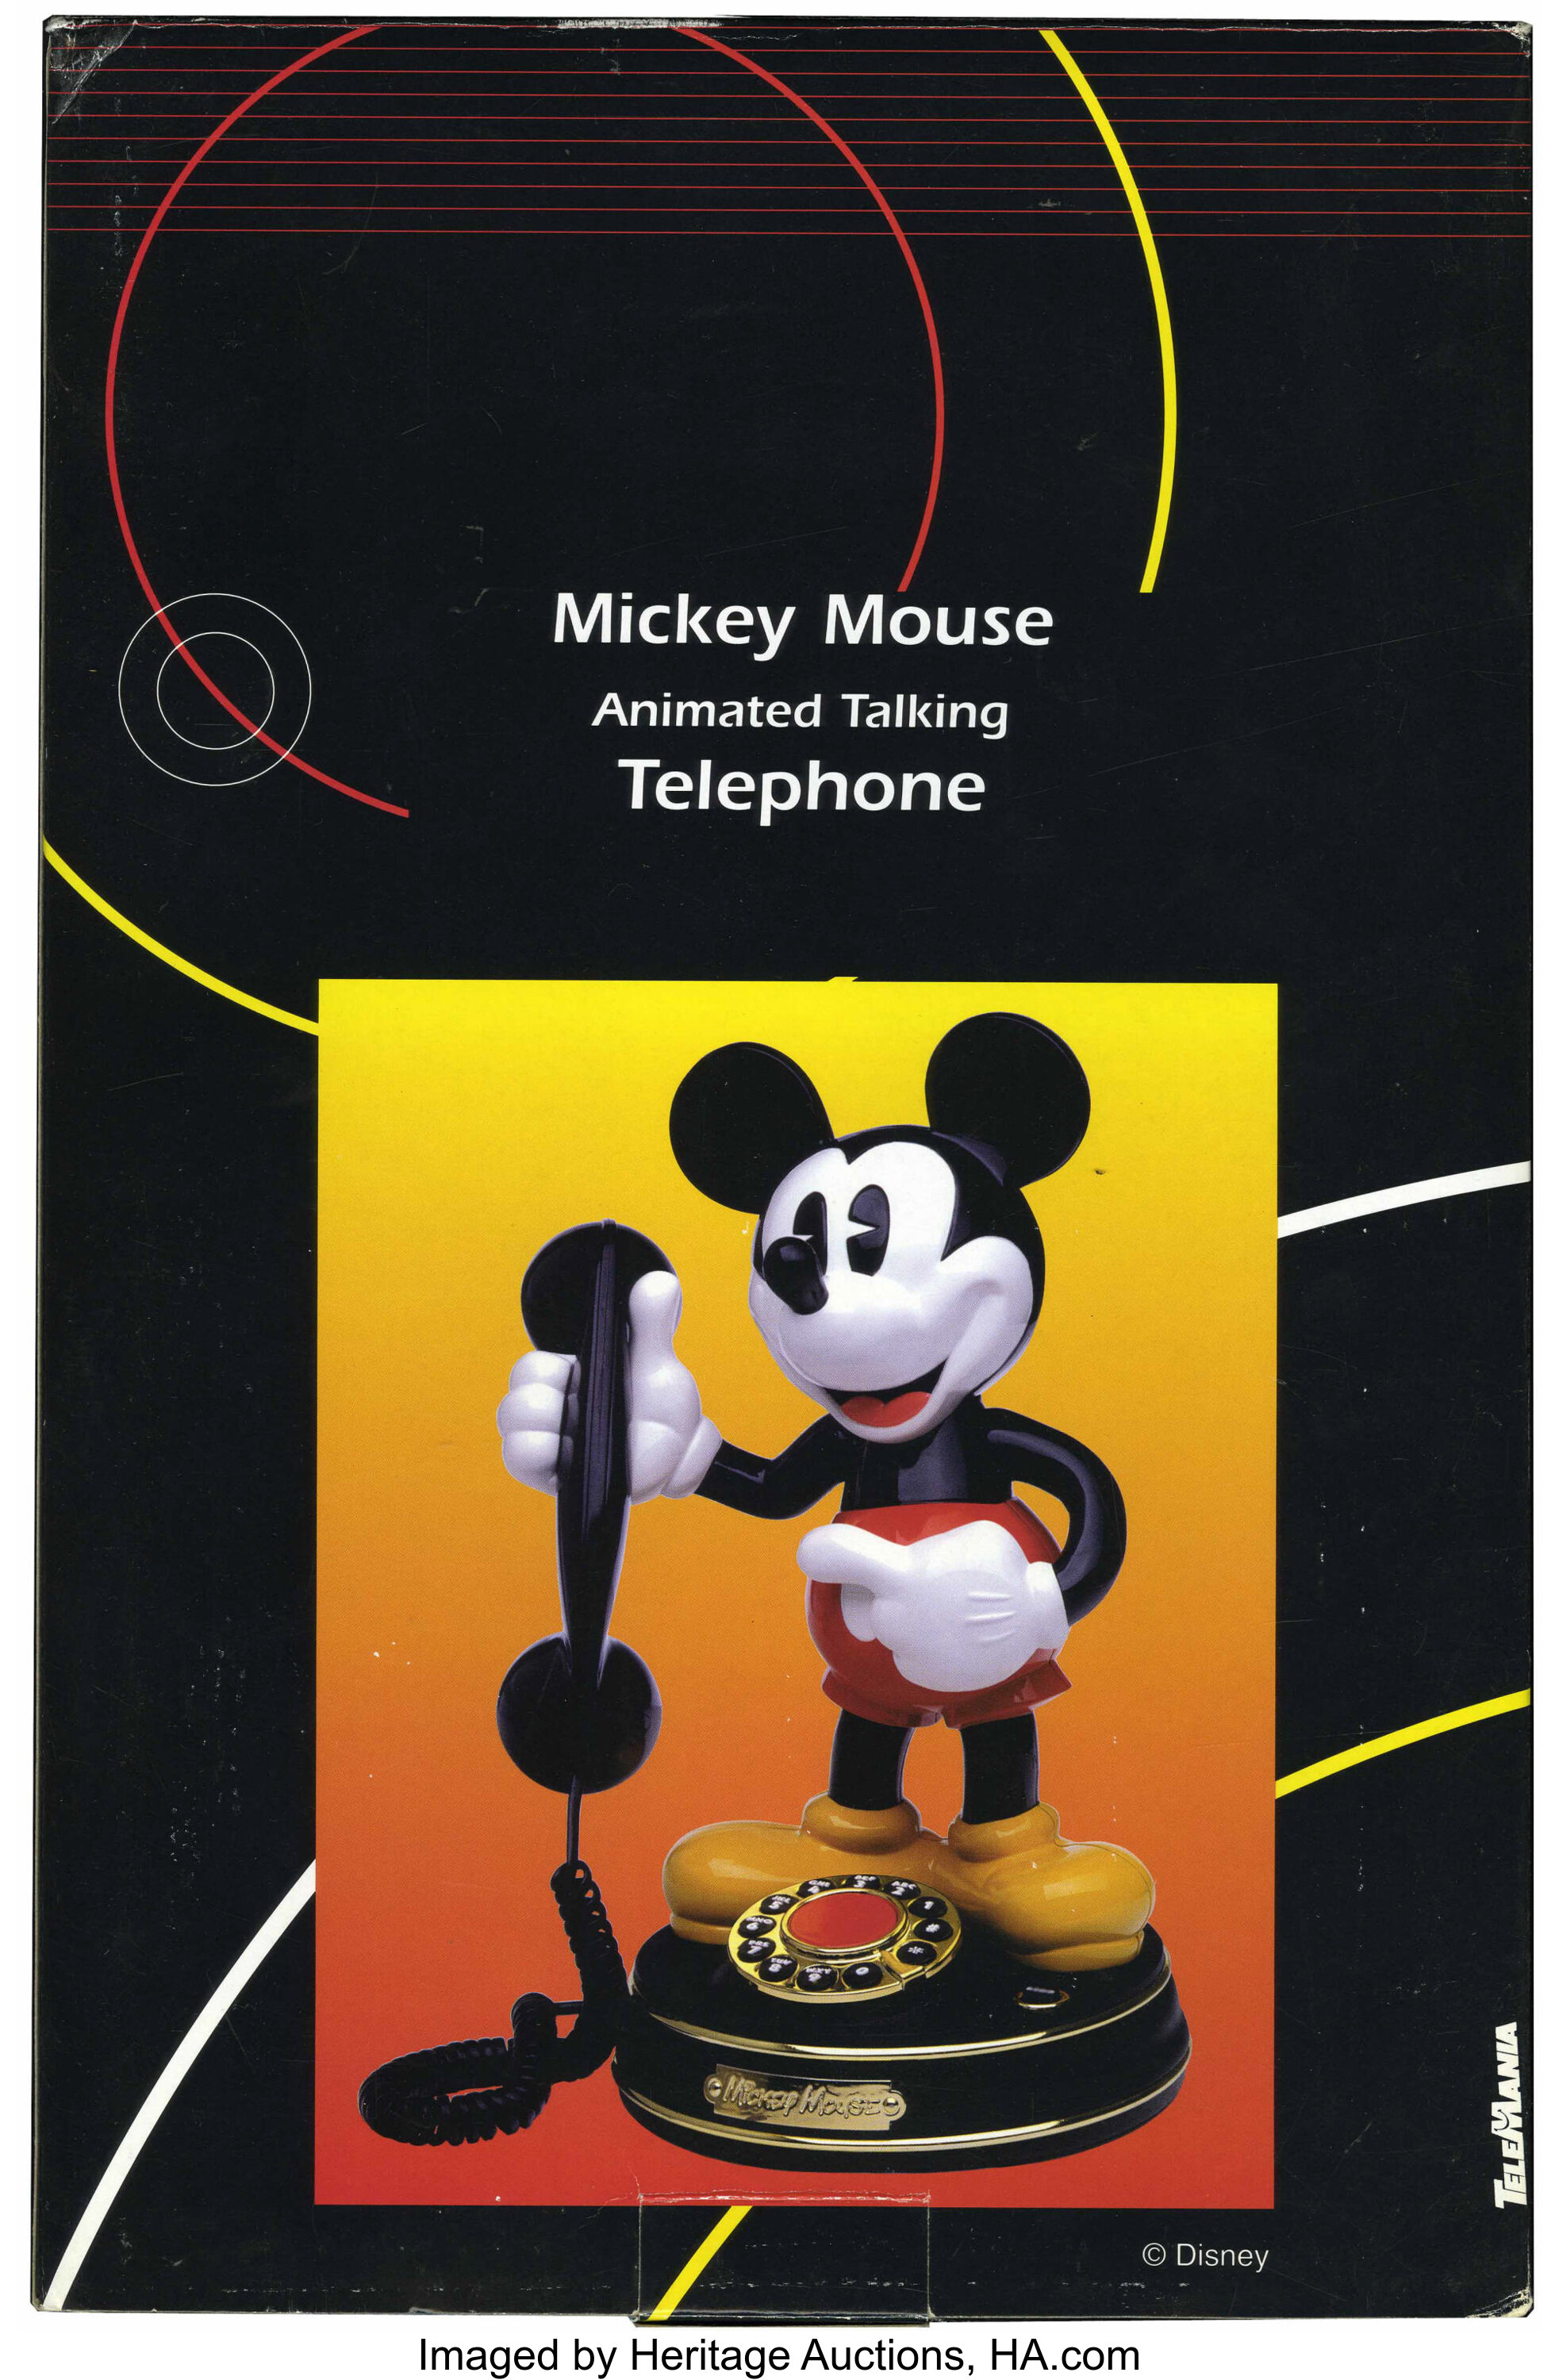 Mickey Mouse Animated Talking Phone www.np.gov.lk